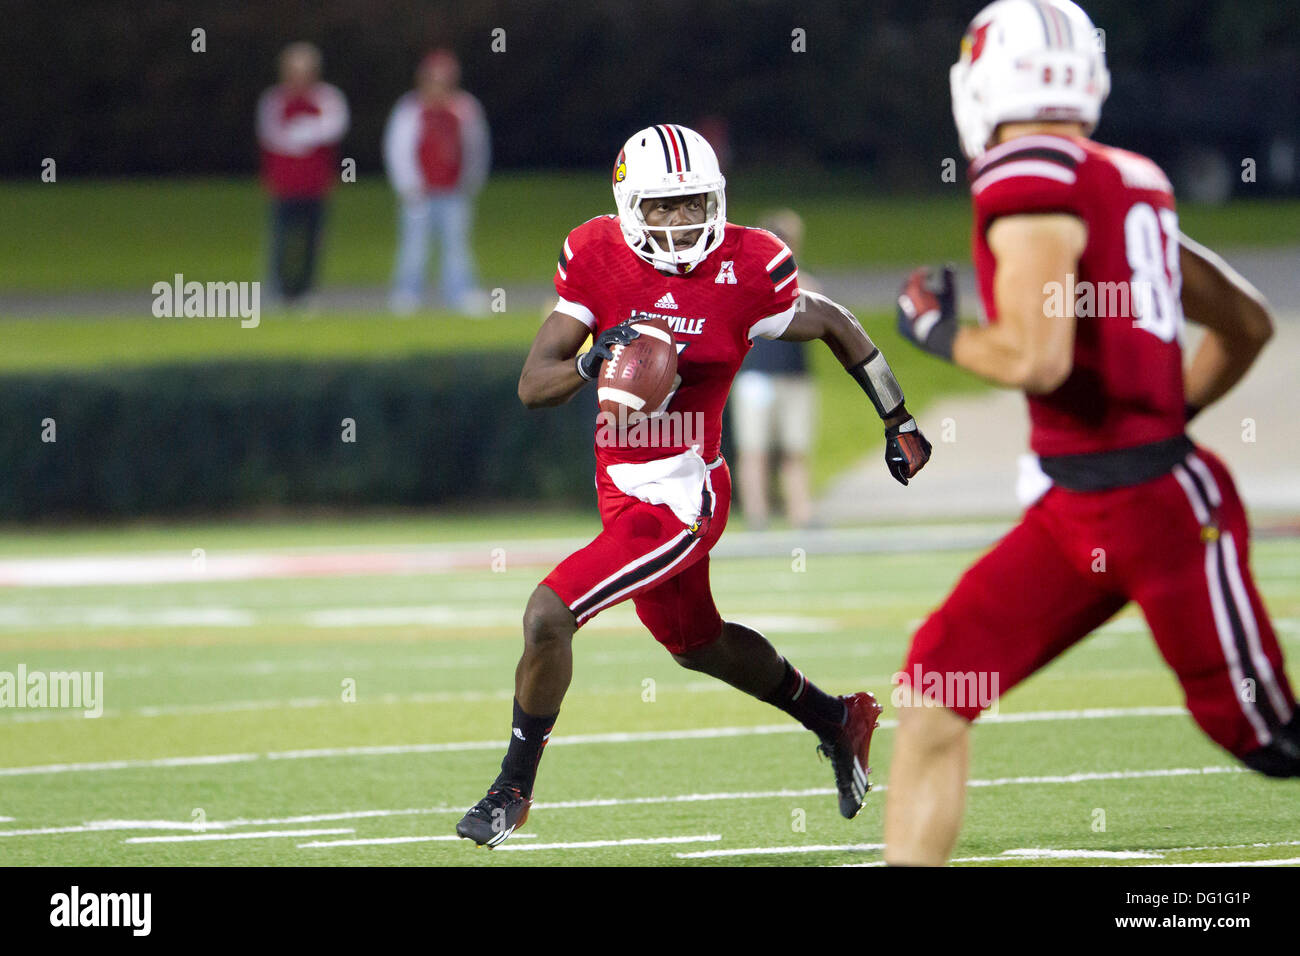 Louisville, KY, USA. 10th Oct, 2013. October 10, 2013: QB (5) Teddy Bridgewater decides to run when being forced from the pocket during the NCAA football game between the Rutgers Scarlet Knights and the Louisville Cardinals at Papa John's Stadium in Louisville, KY. Louisville defeated Rutgers 24-10. Credit:  csm/Alamy Live News Stock Photo